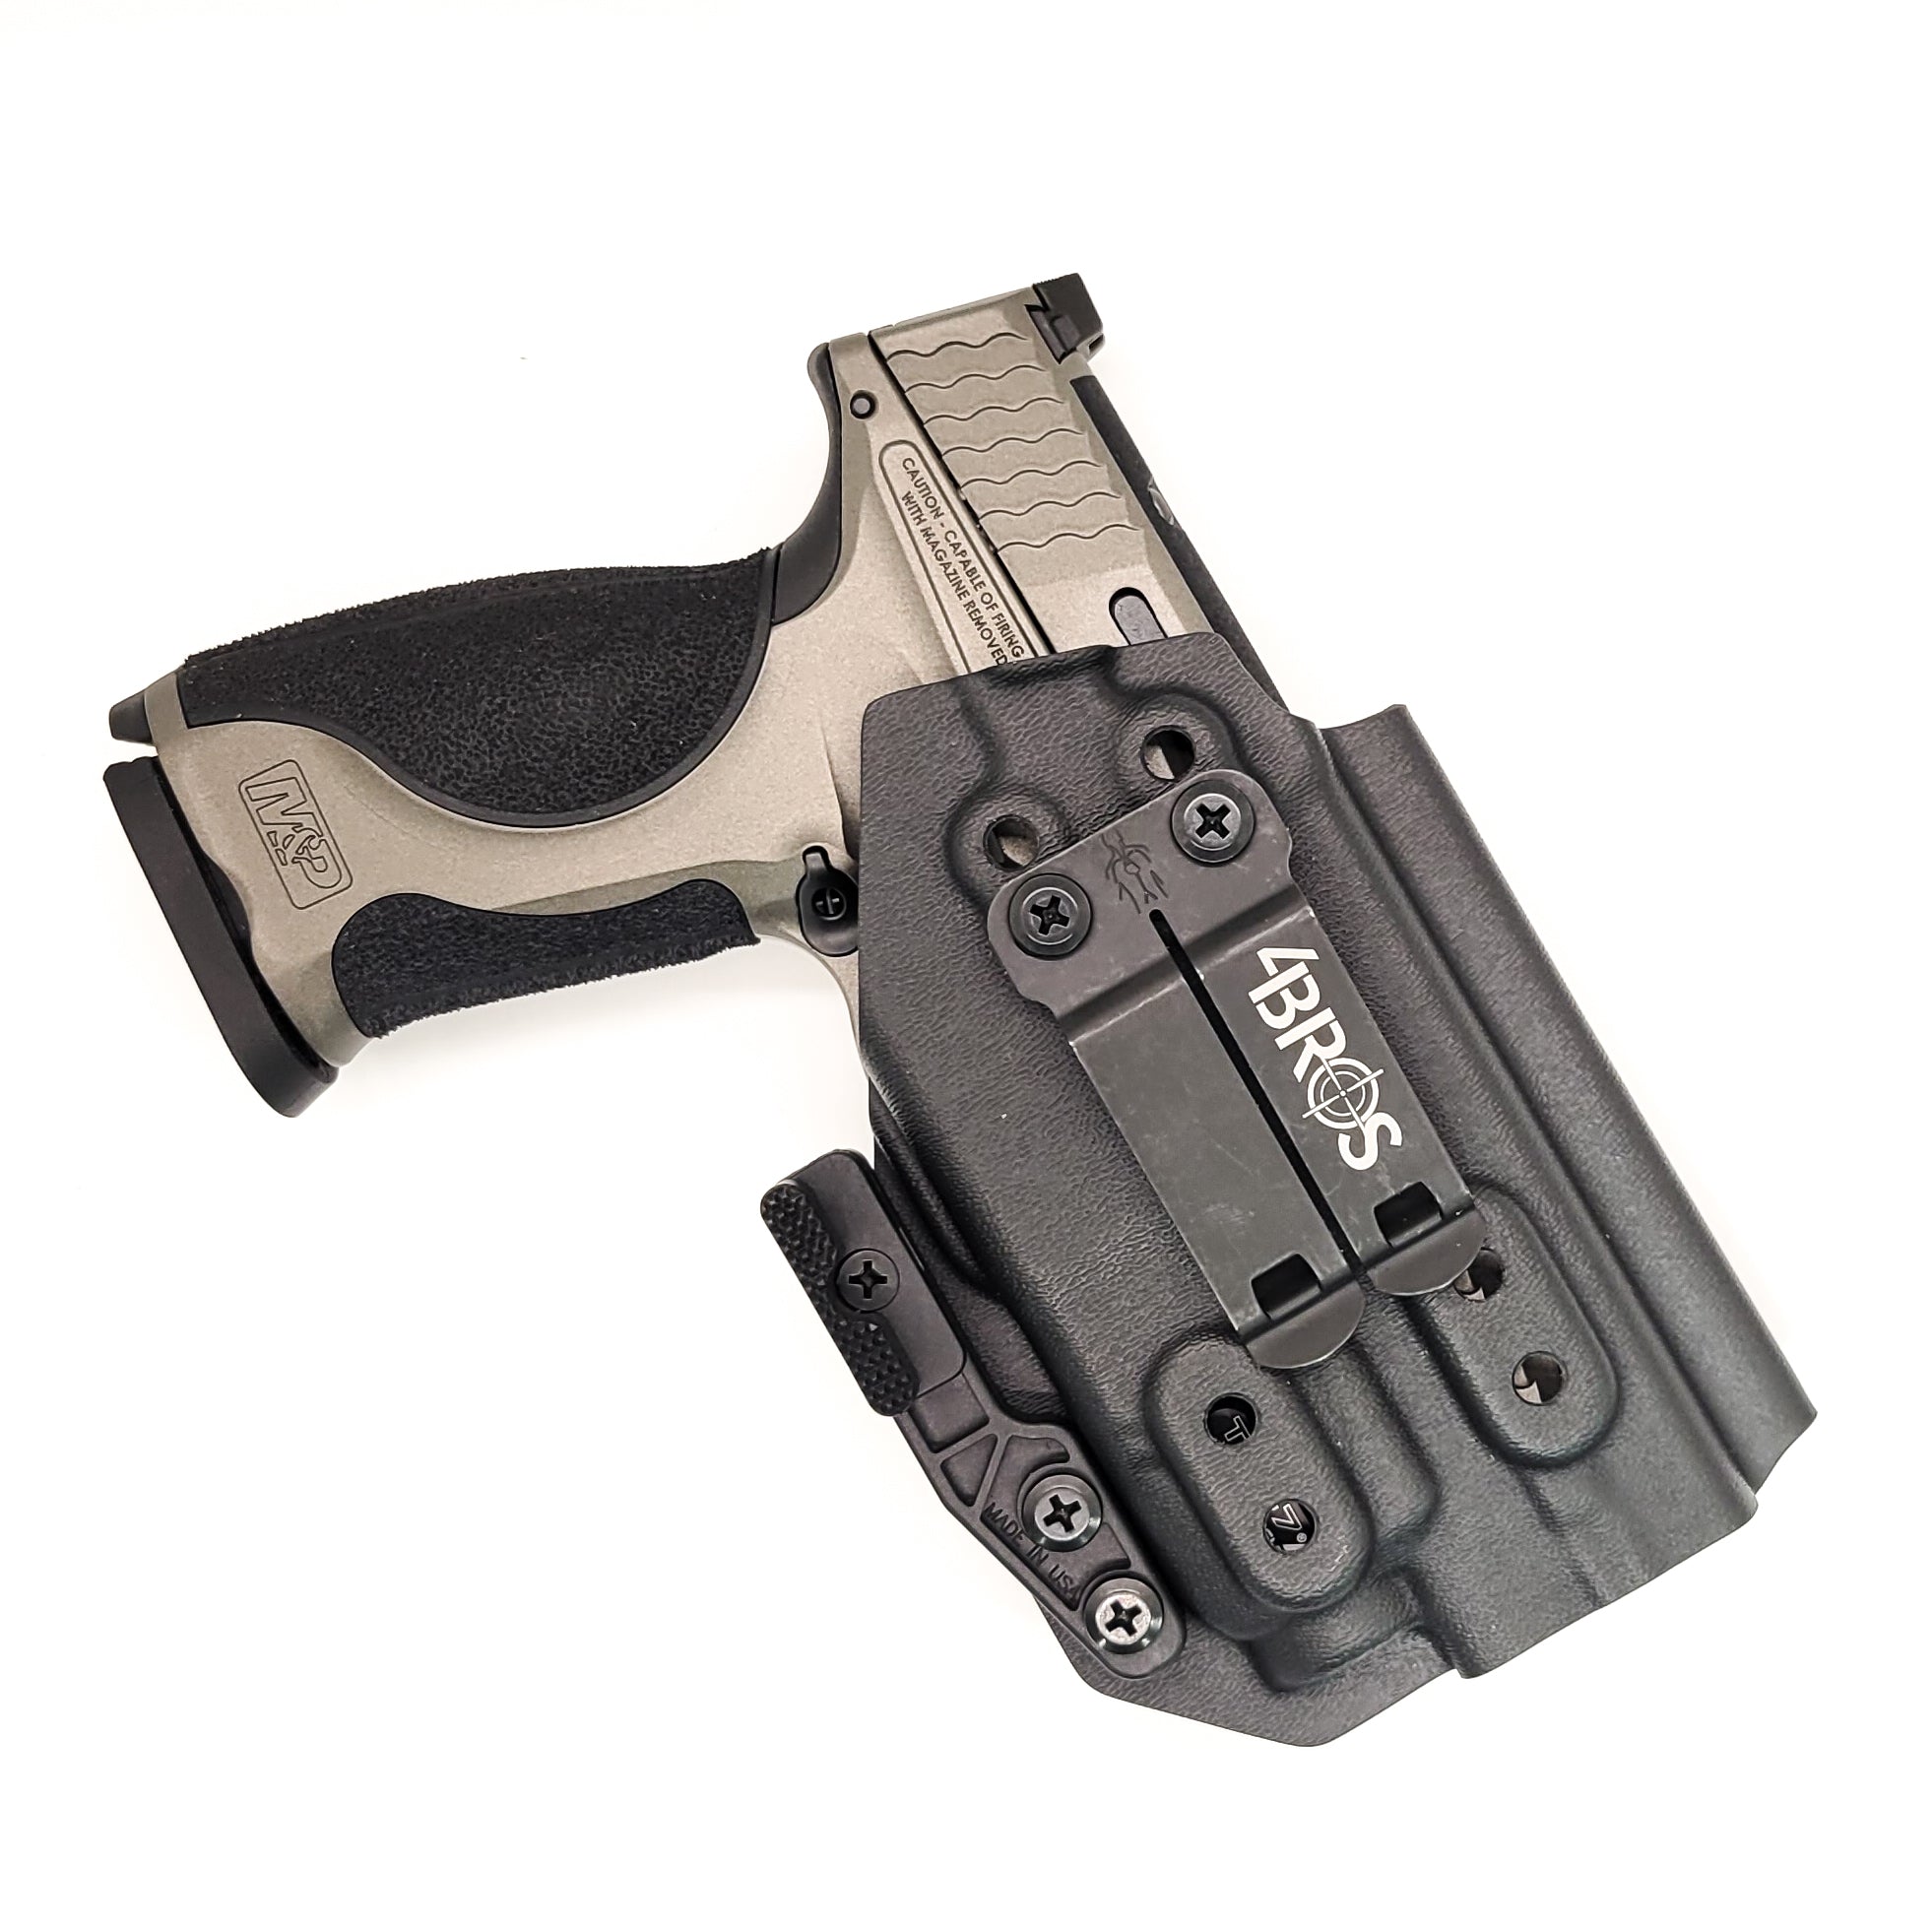 Inside Waistband IWB AIWB Kydex Holster designed to fit the Smith & Wesson M&P M2.0 Metal pistols with the Streamlight TLR-7 or TLR-7A light mounted to the pistol. Full sweat guard, adjustable retention, minimal material, and smooth edges to reduce printing. Cleared for red dot sights. Proudly made in the USA.